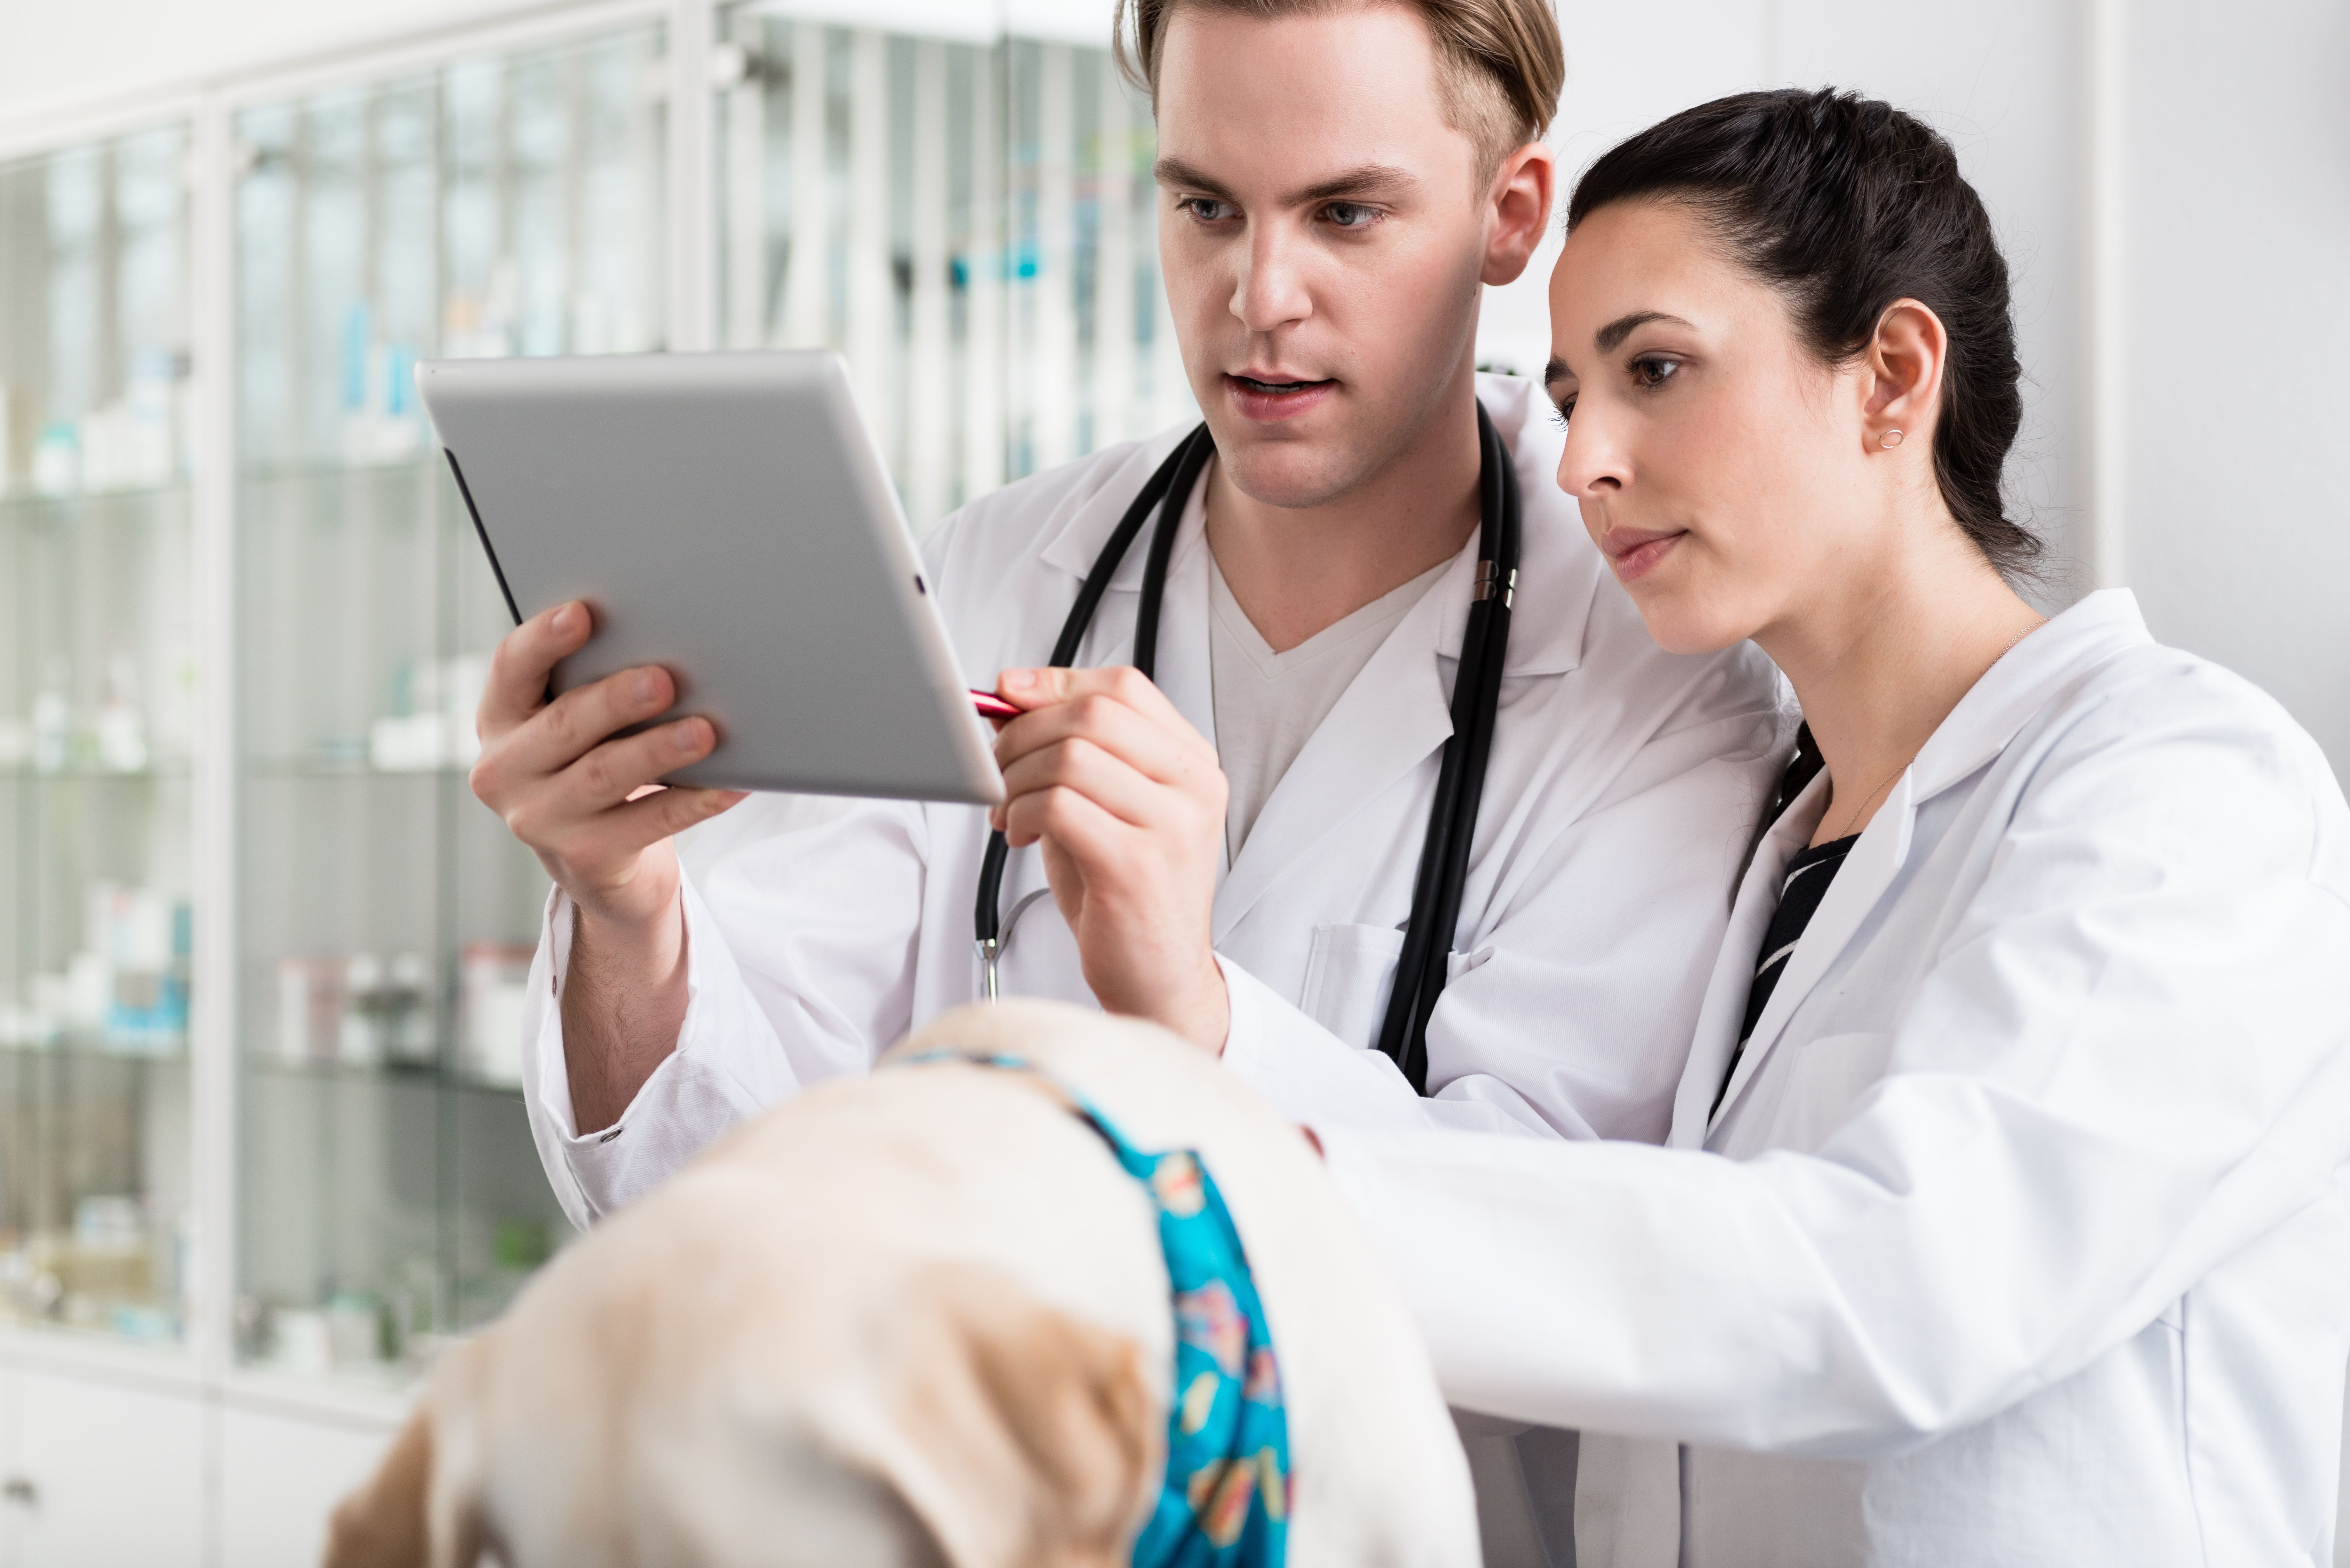 2 Compelling ways to enhance telemedicine at your practice